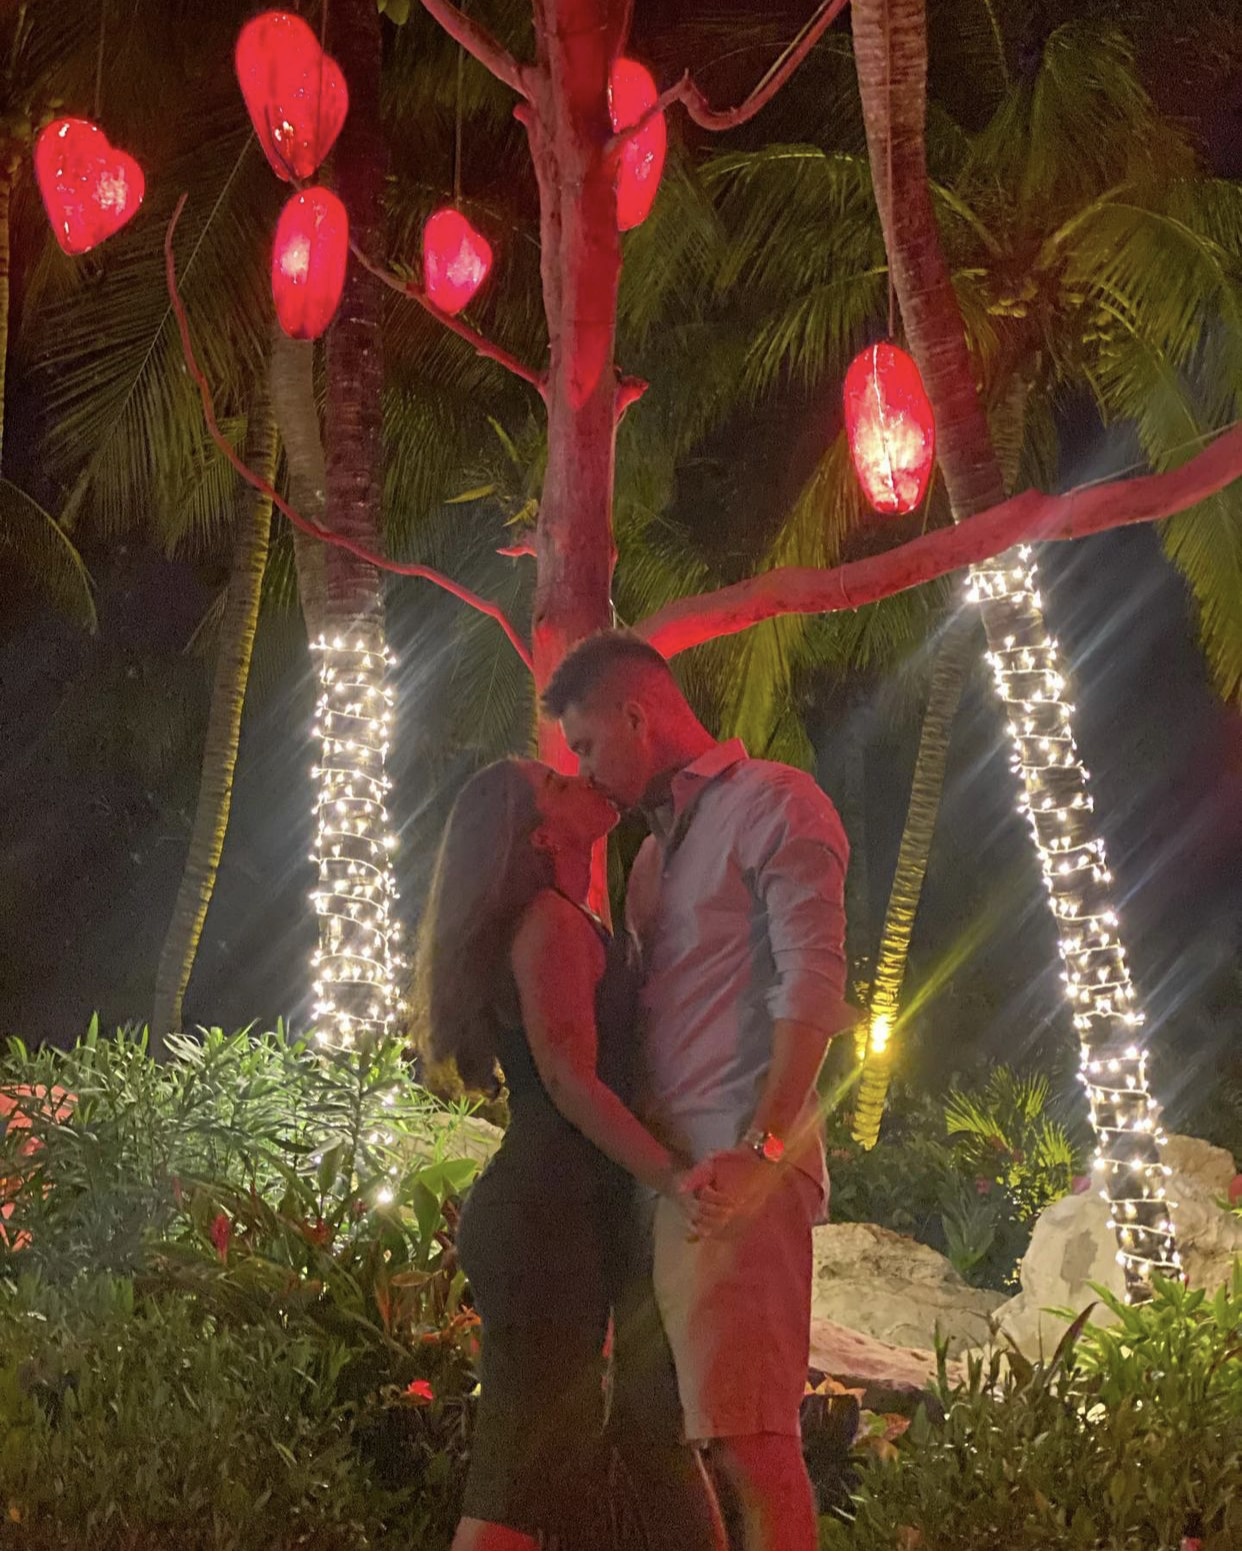 couple kissing under red lanterns at night in garden